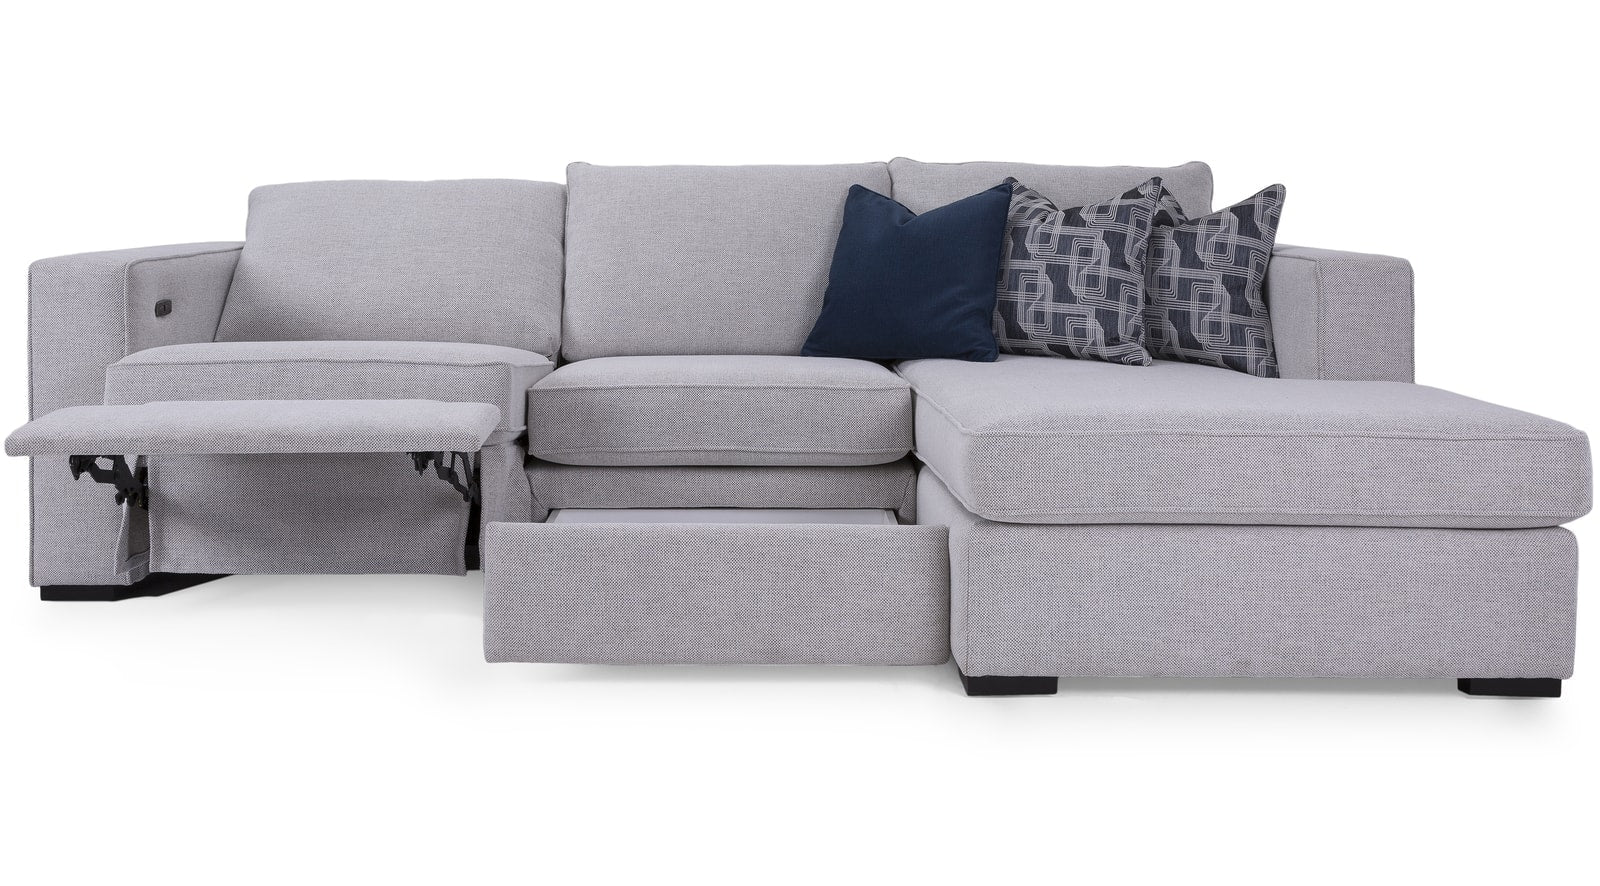 Comfortable sofa chaise sectional.